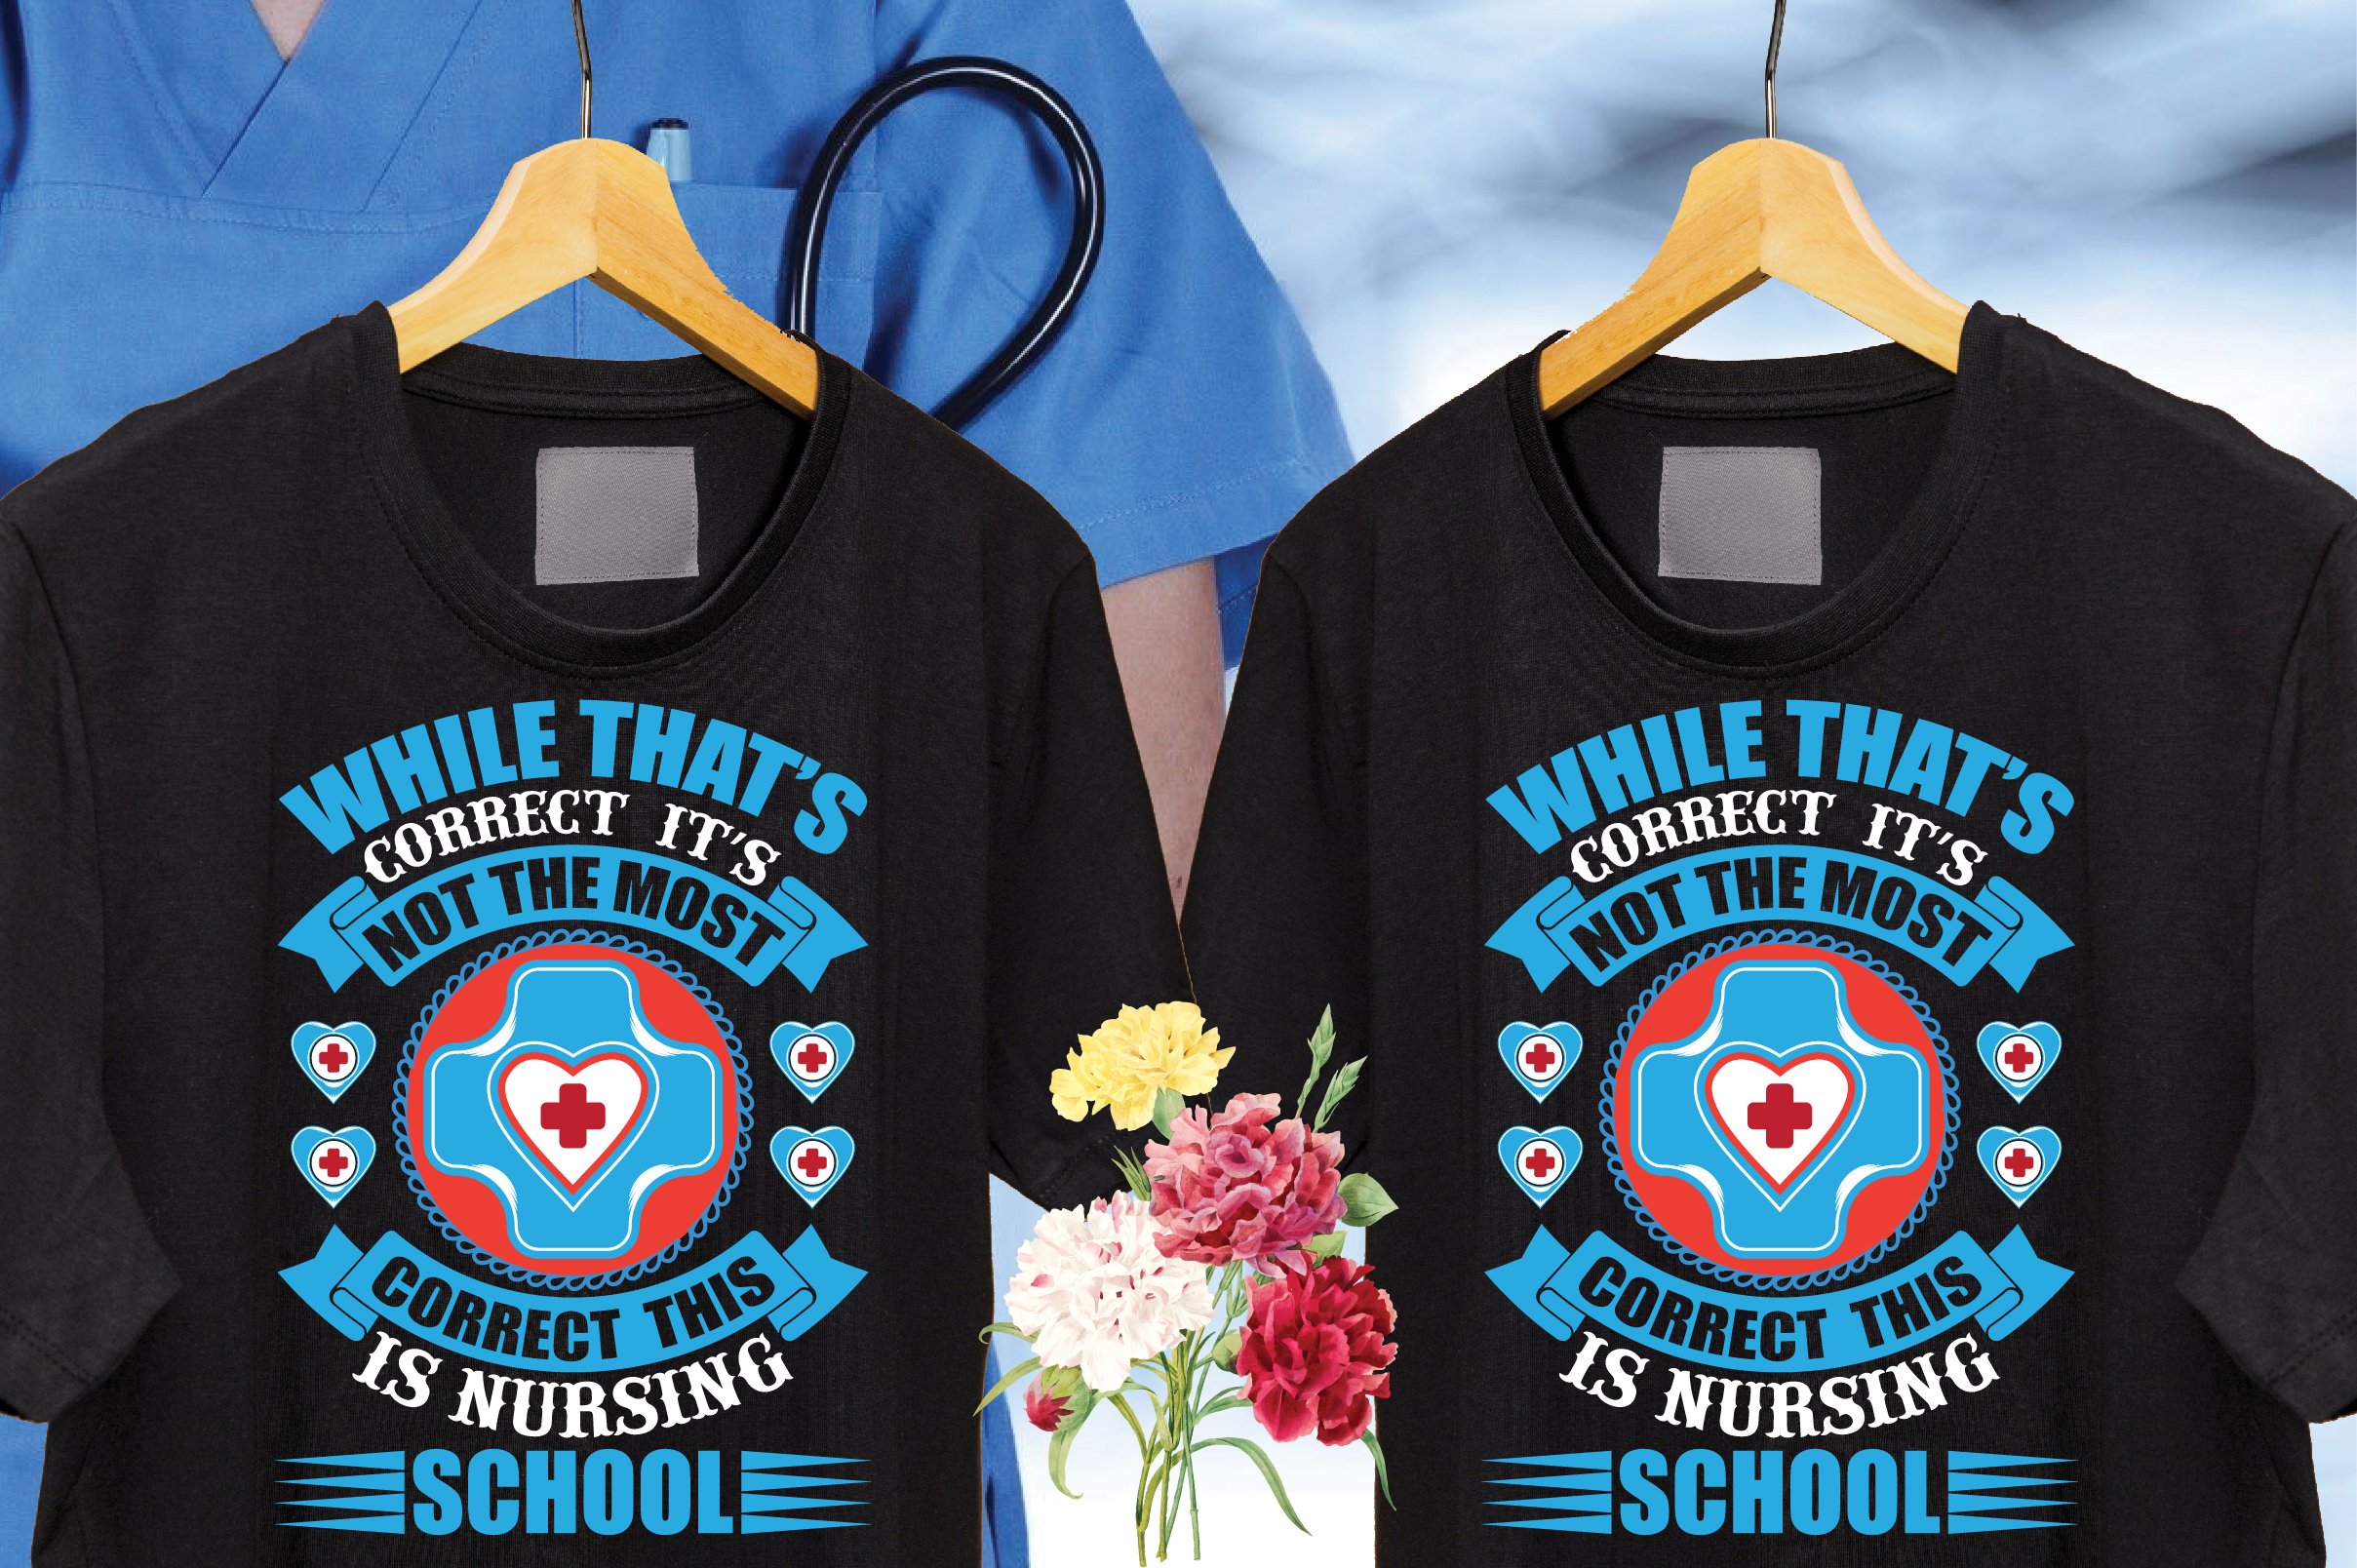 Two colored nurse print on the black t-shirts.